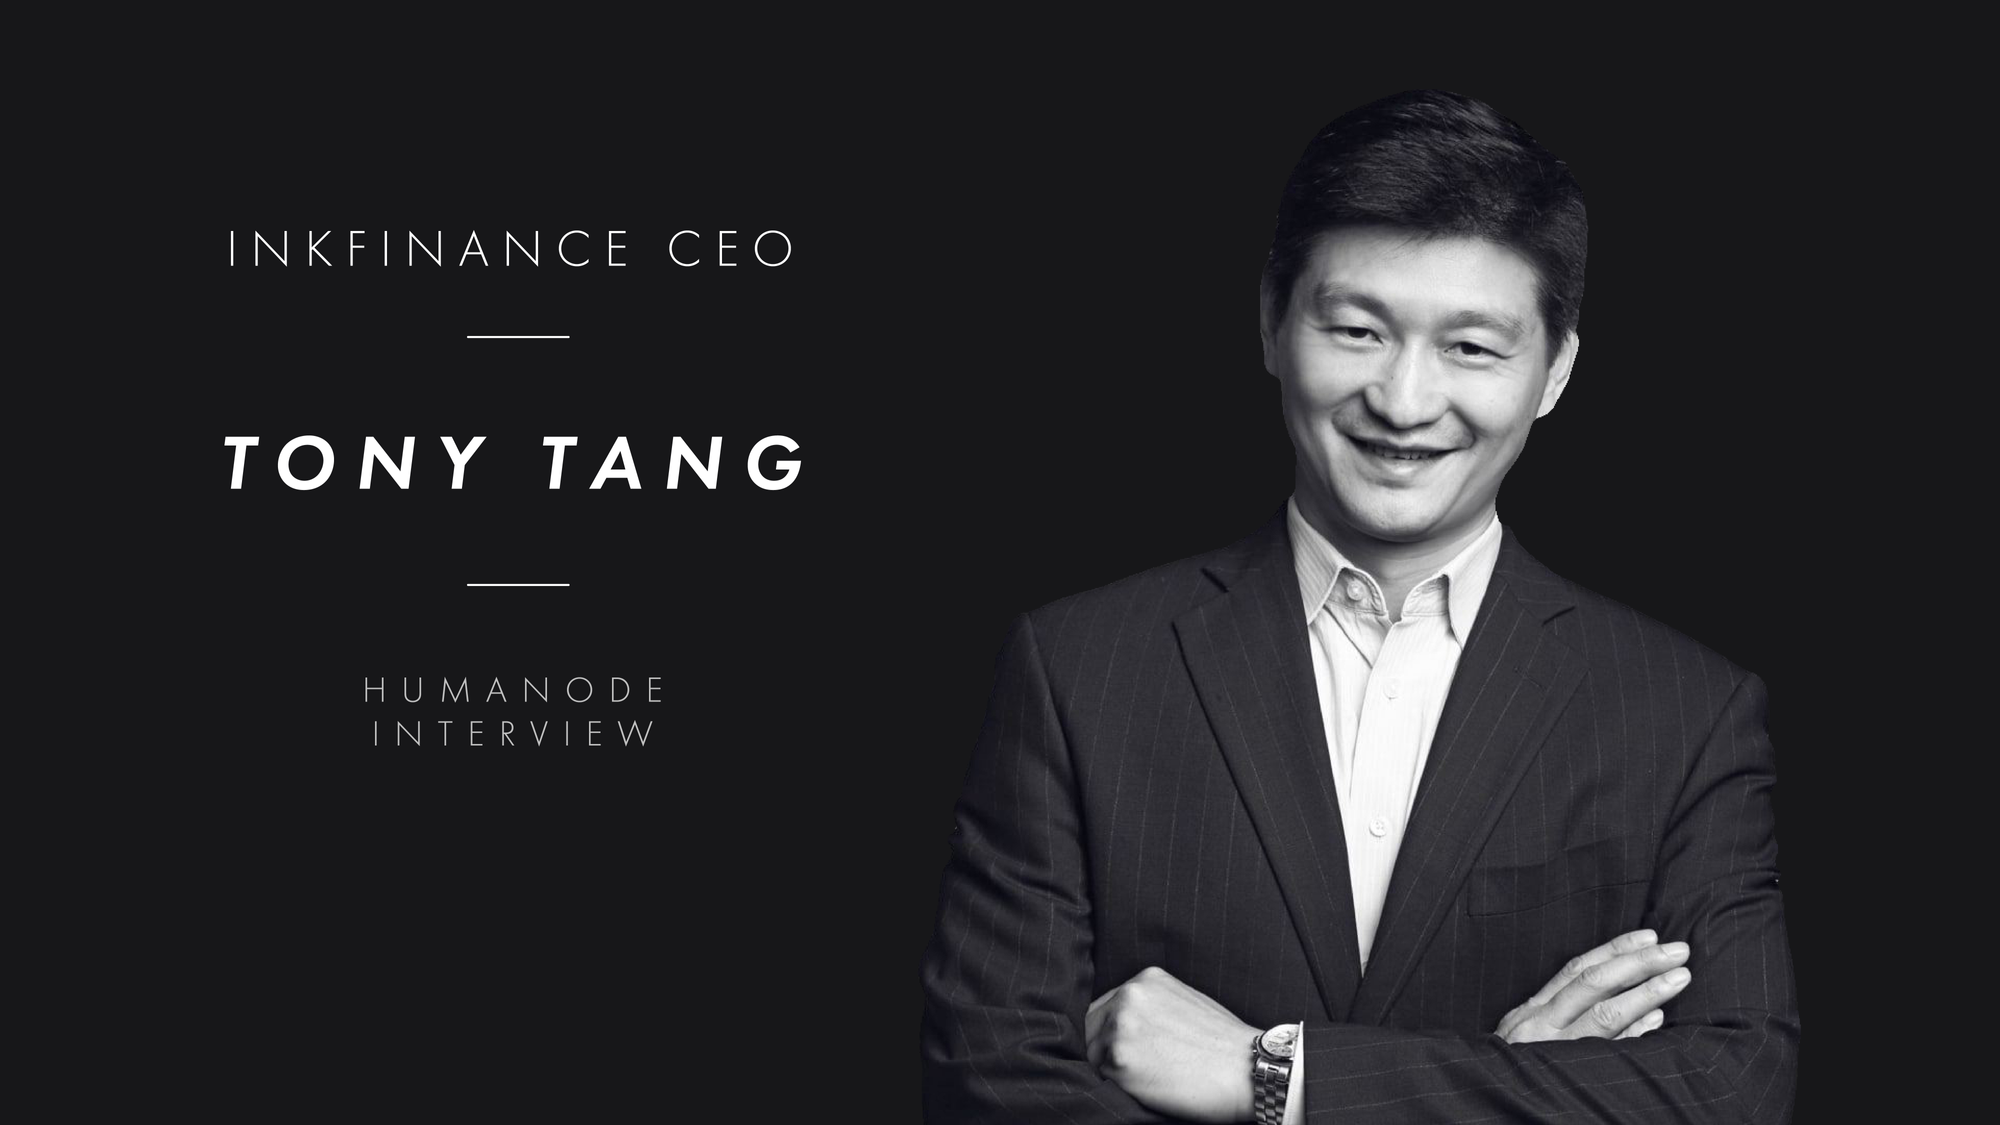 Interview with Tony Tang, Founder and CEO of Ink Finance